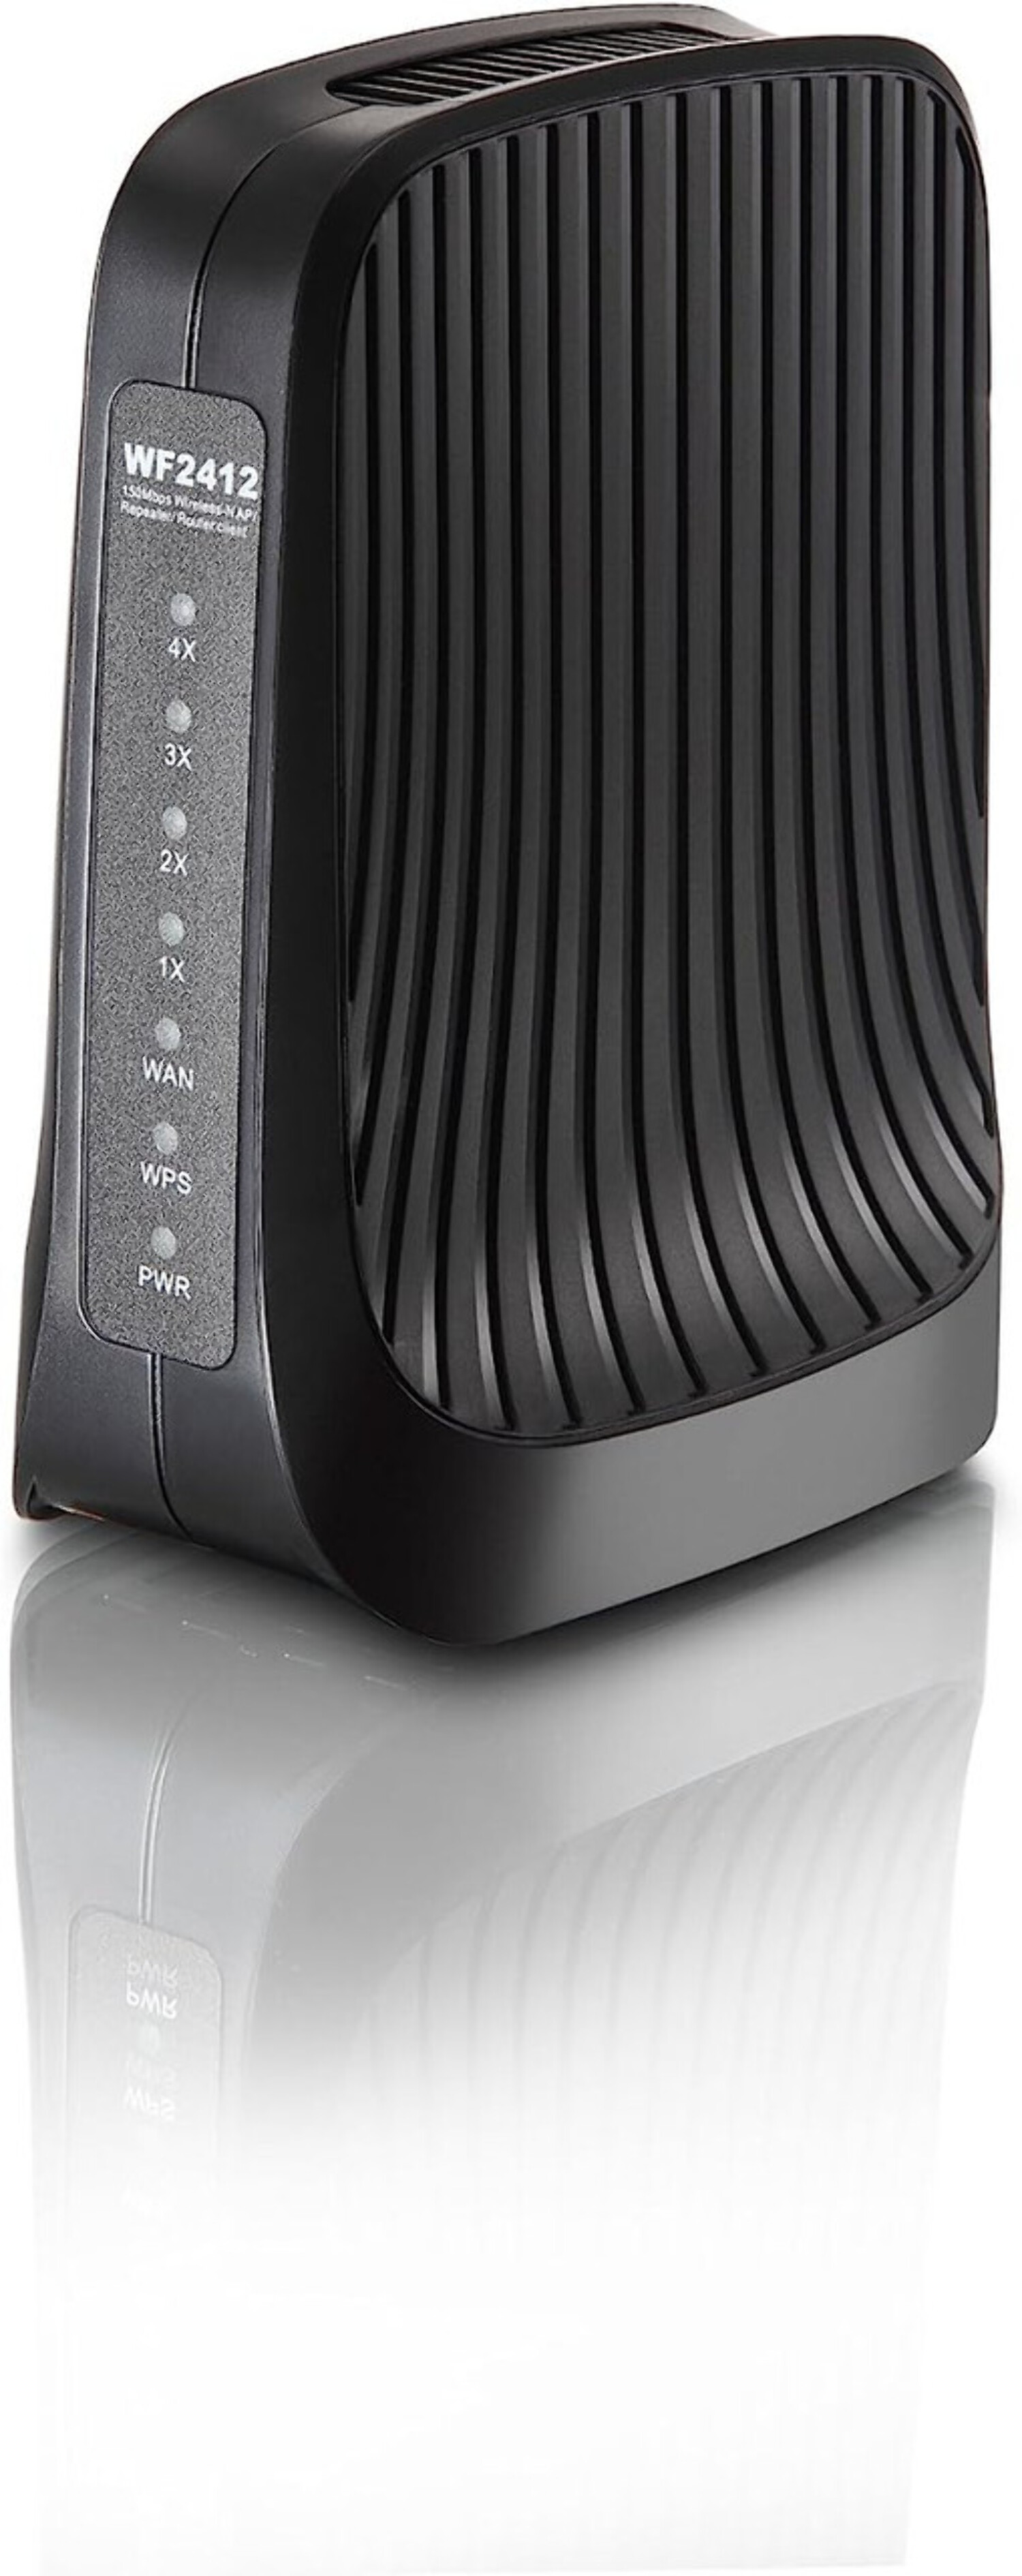 Netis WF2412 - Wireless router - 4-port switch - Wi-Fi - 2.4 GHz - image 5 of 6